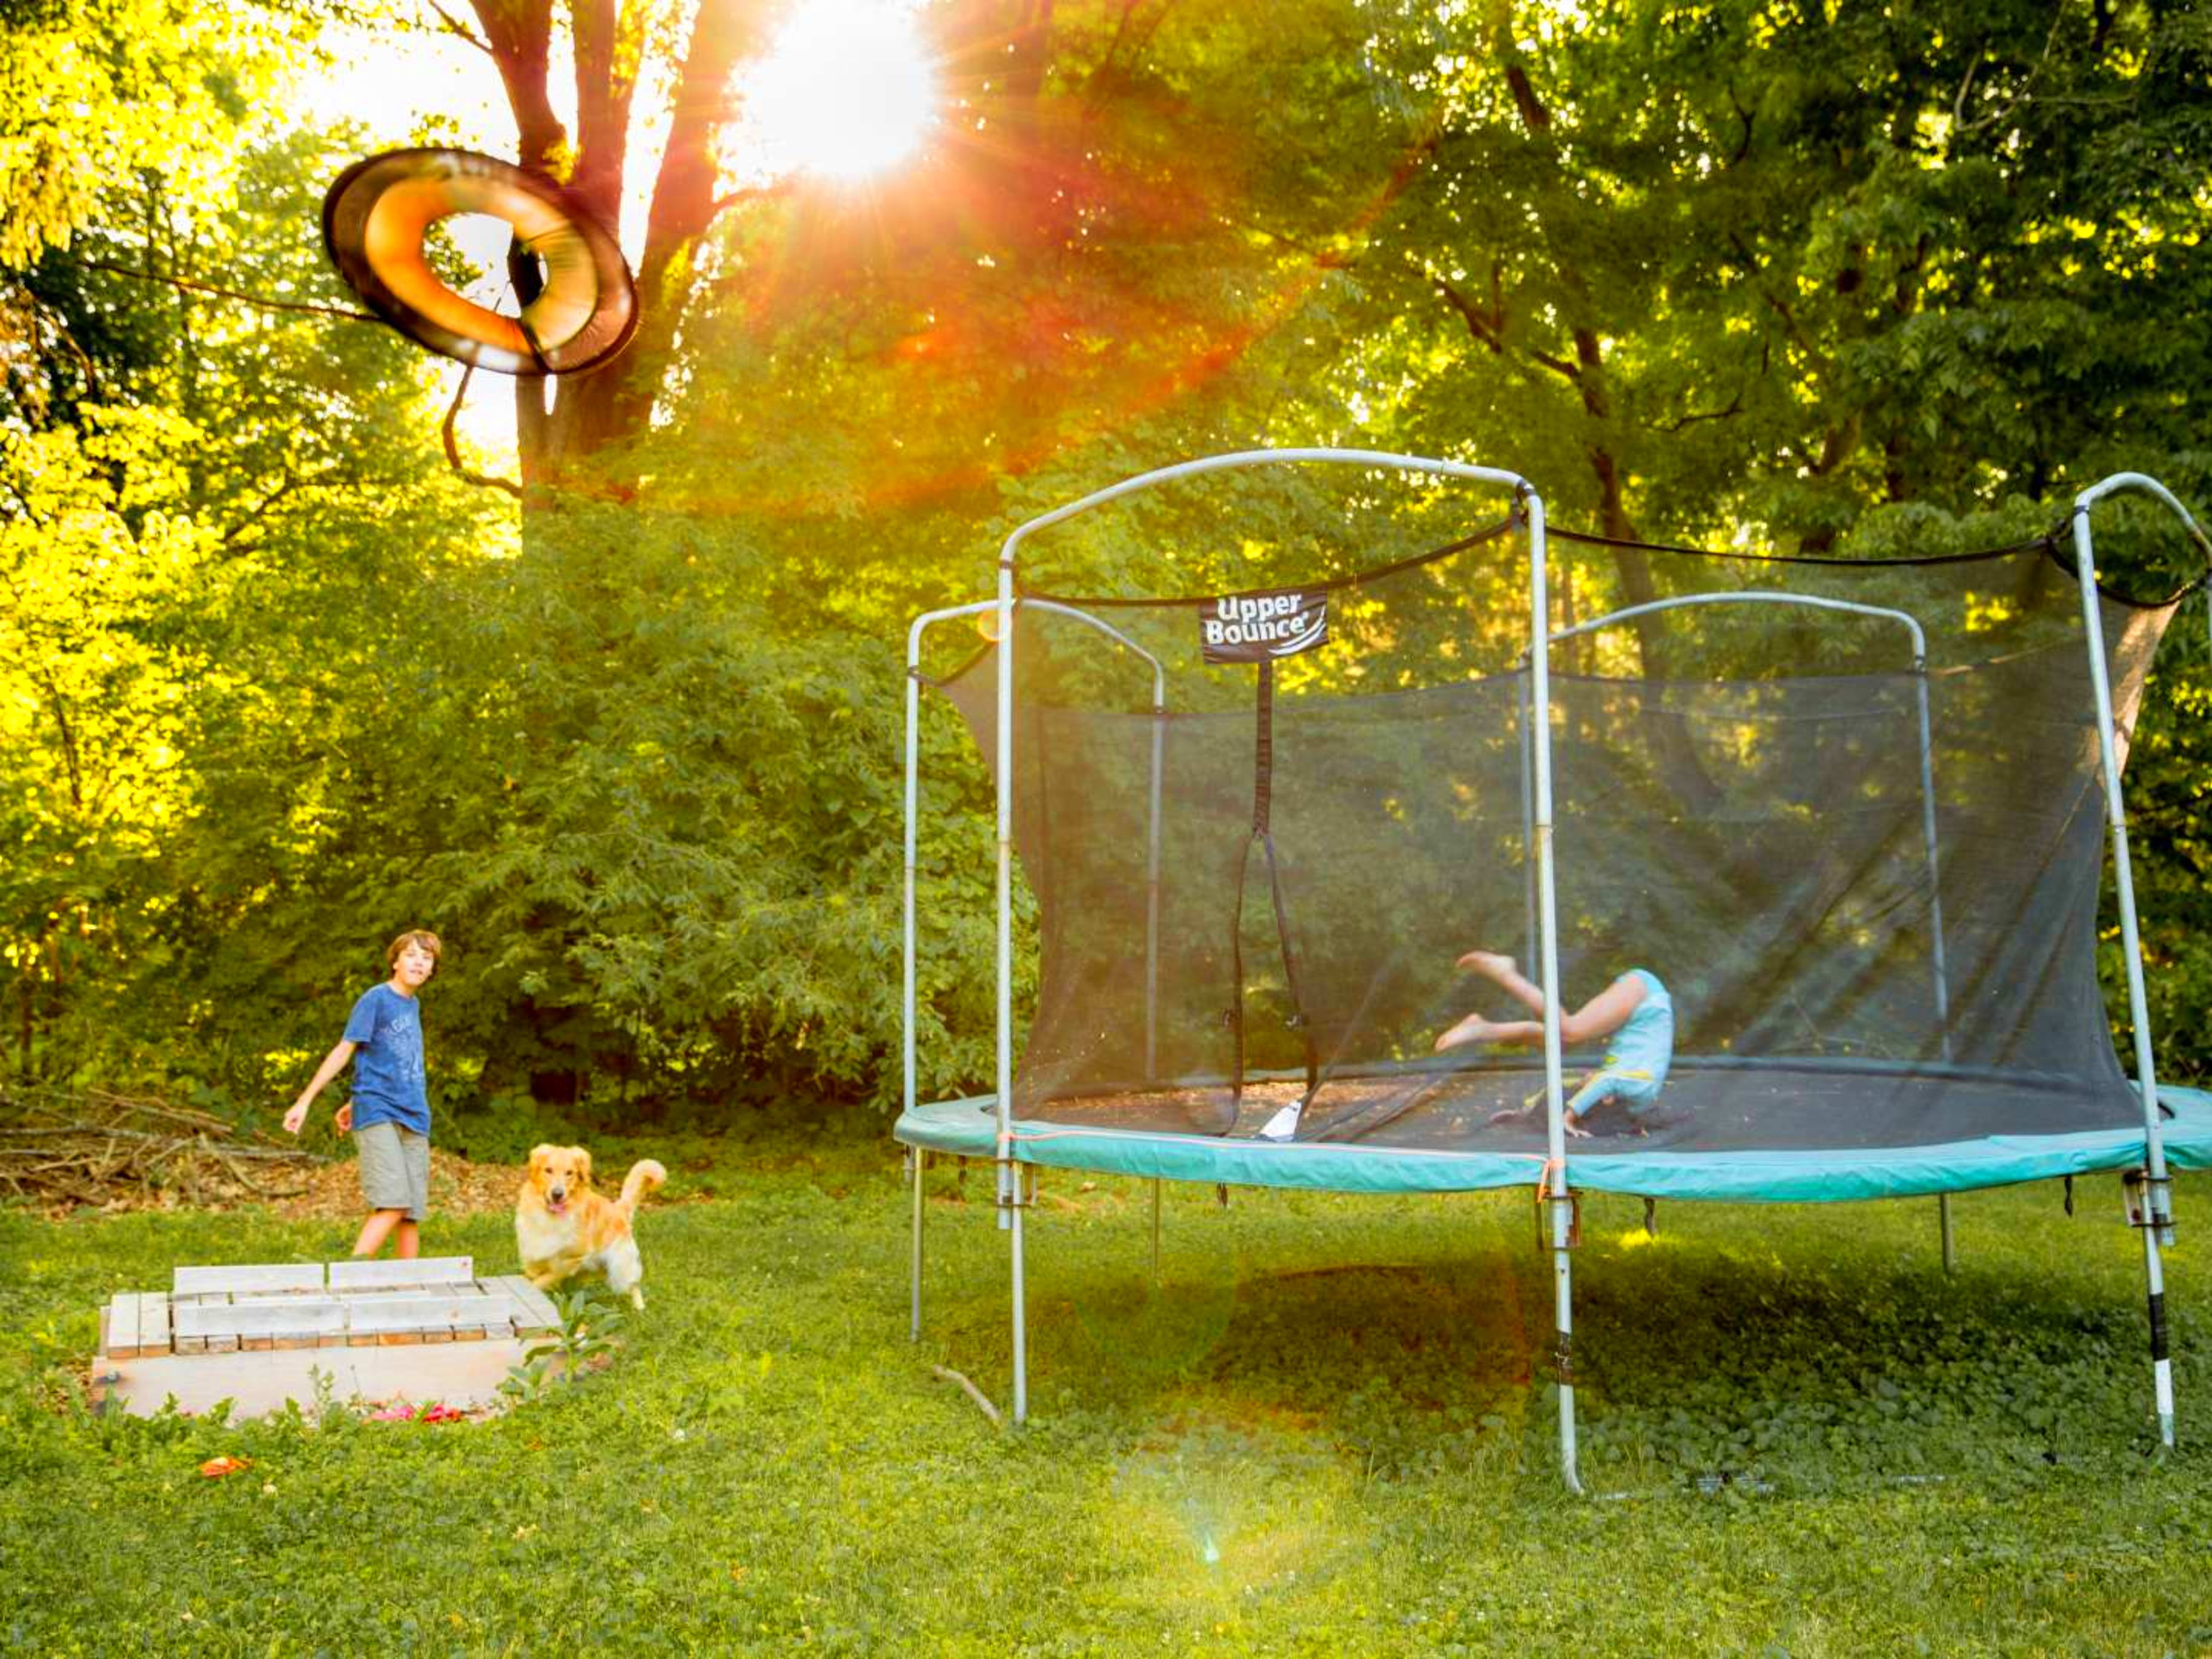 Black ASTM Approval Lyromix 12 ft Trampoline with Enclosure Recreational Trampolines with Ladder for Kids and Adult 